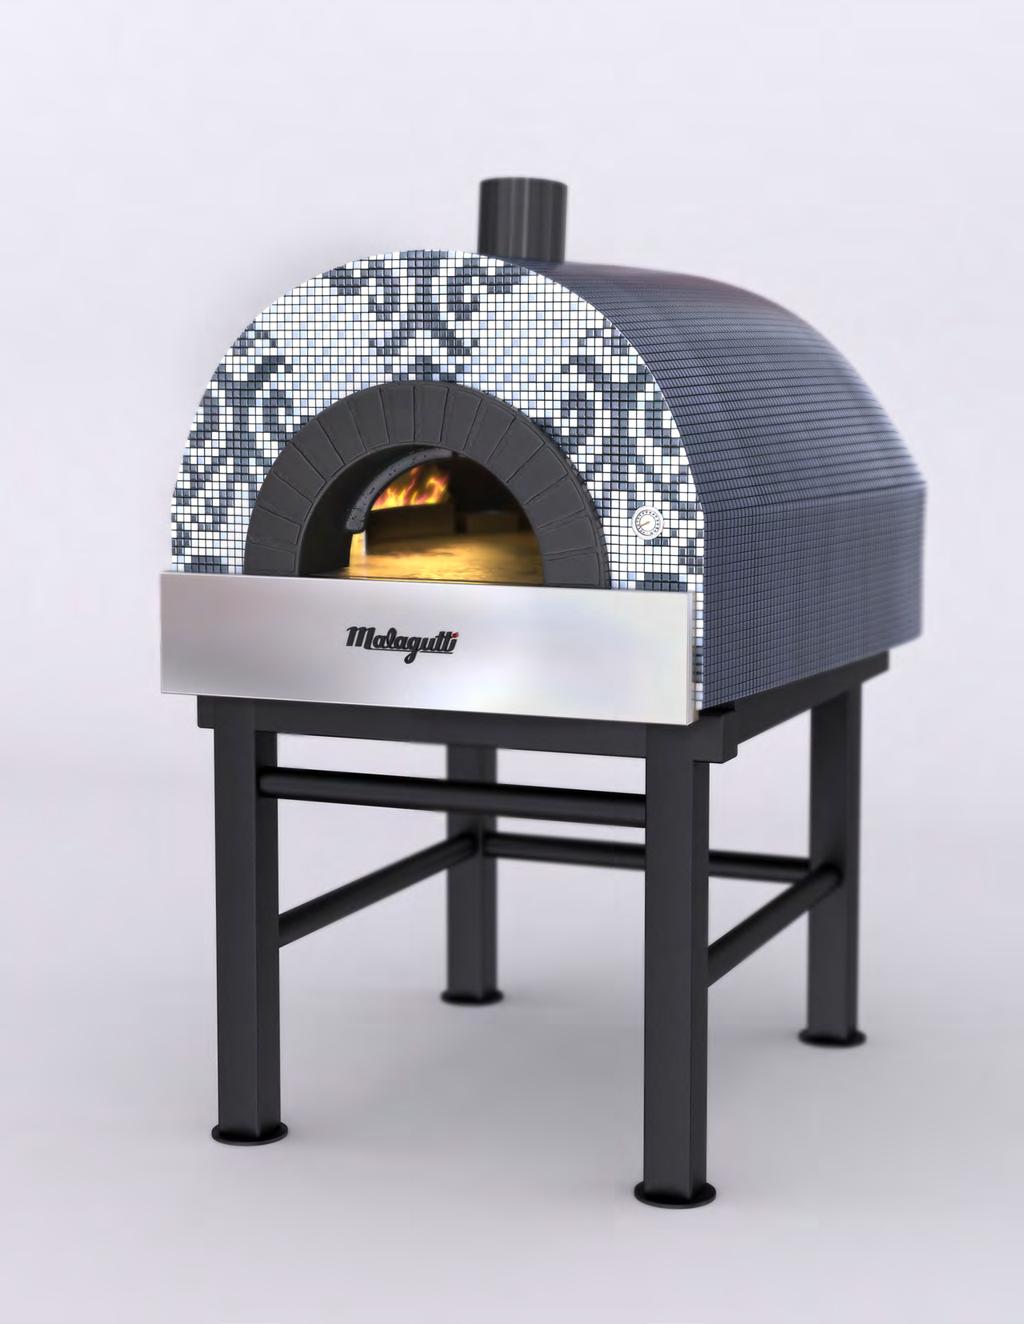 ROMA For the last fifty years, the Roma style oven has been the most popular choice for pizza making in Italy. This timeless oven design provides the most finishing choices.